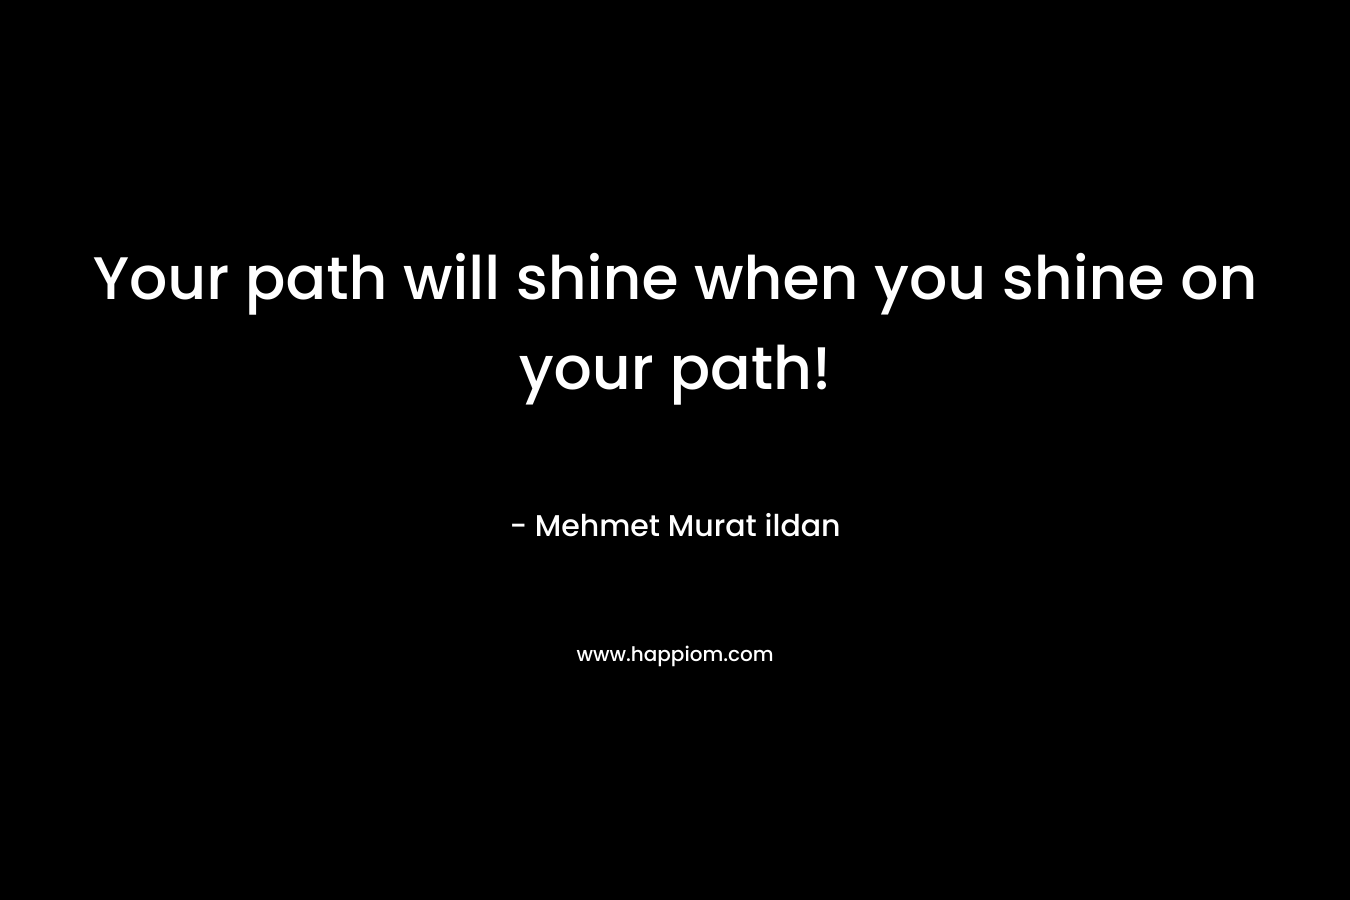 Your path will shine when you shine on your path!